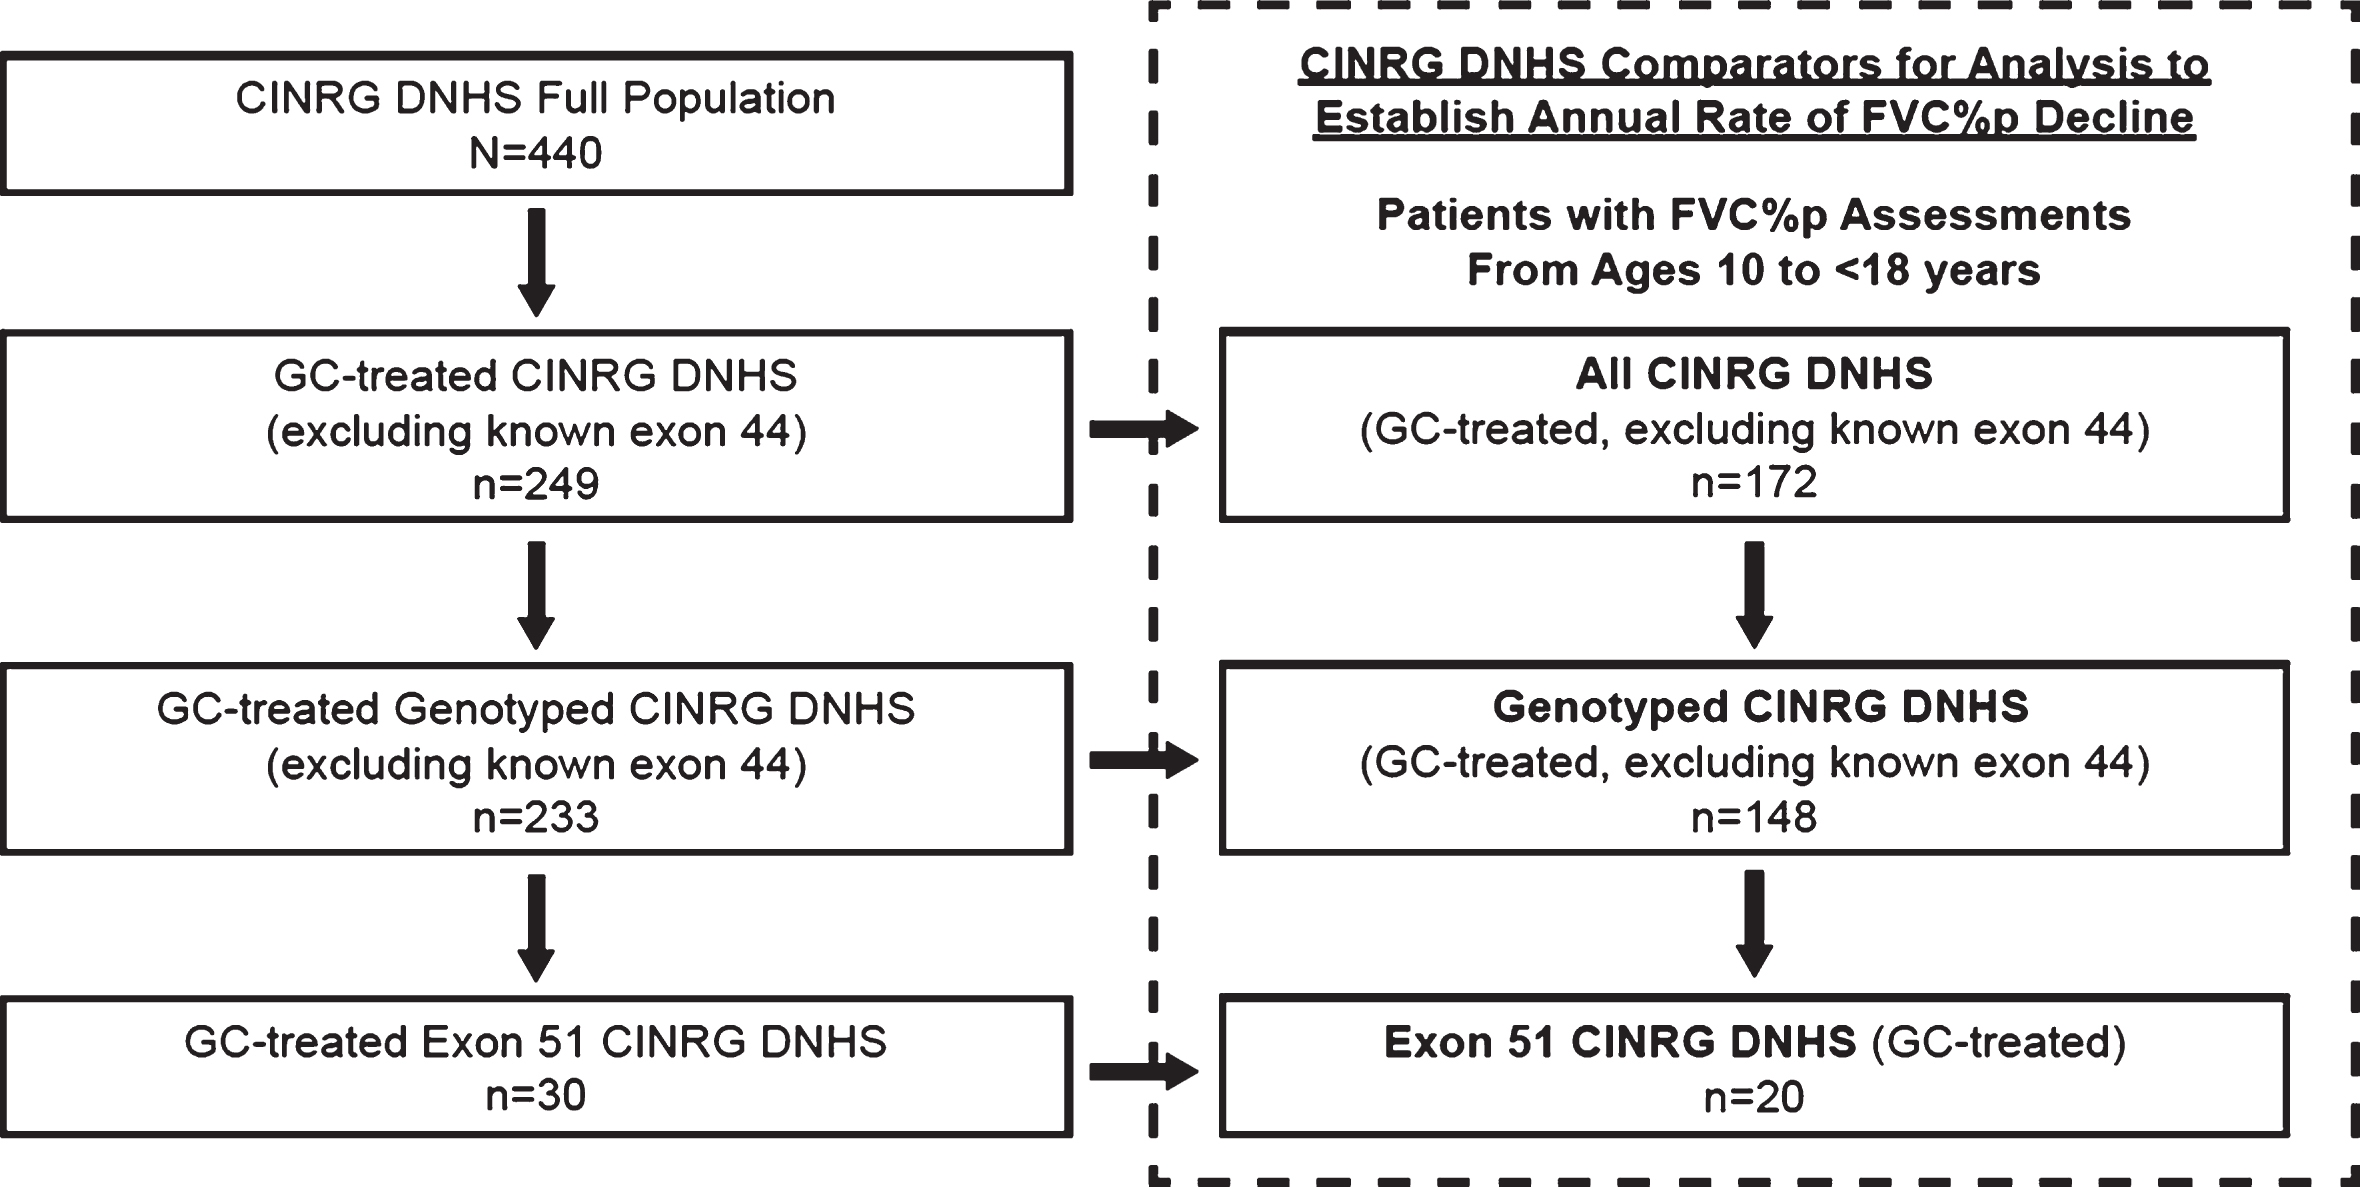 Derivation of CINRG DNHS cohorts for comparison of eteplirsen studies. The CINRG DNHS database contains data from 440 patients with DMD across all ages. The All CINRG DNHS cohort (n = 172) comprised glucocorticoid-treated patients with FVC% p assessments obtained between the ages of 10 and 18 years, and excluded any known exon 44 skip–amenable patients. The Genotyped CINRG DNHS cohort (n = 148) comprised glucocorticoid-treated, genetically confirmed patients with FVC% p assessments between the ages of 10 and 18 years and excluded exon 44 skip-amenable patients. The Exon 51 CINRG DNHS cohort (n = 20) comprised glucocorticoid-treated patients between the ages of 10 and 18 years with mutations amenable to exon 51 skipping. CINRG DNHS, Cooperative International Neuromuscular Research Group Duchenne Natural History Study; FVC% p, percent predicted forced vital capacity; GC, glucocorticoid. Dashed box represents pre-specified comparator.